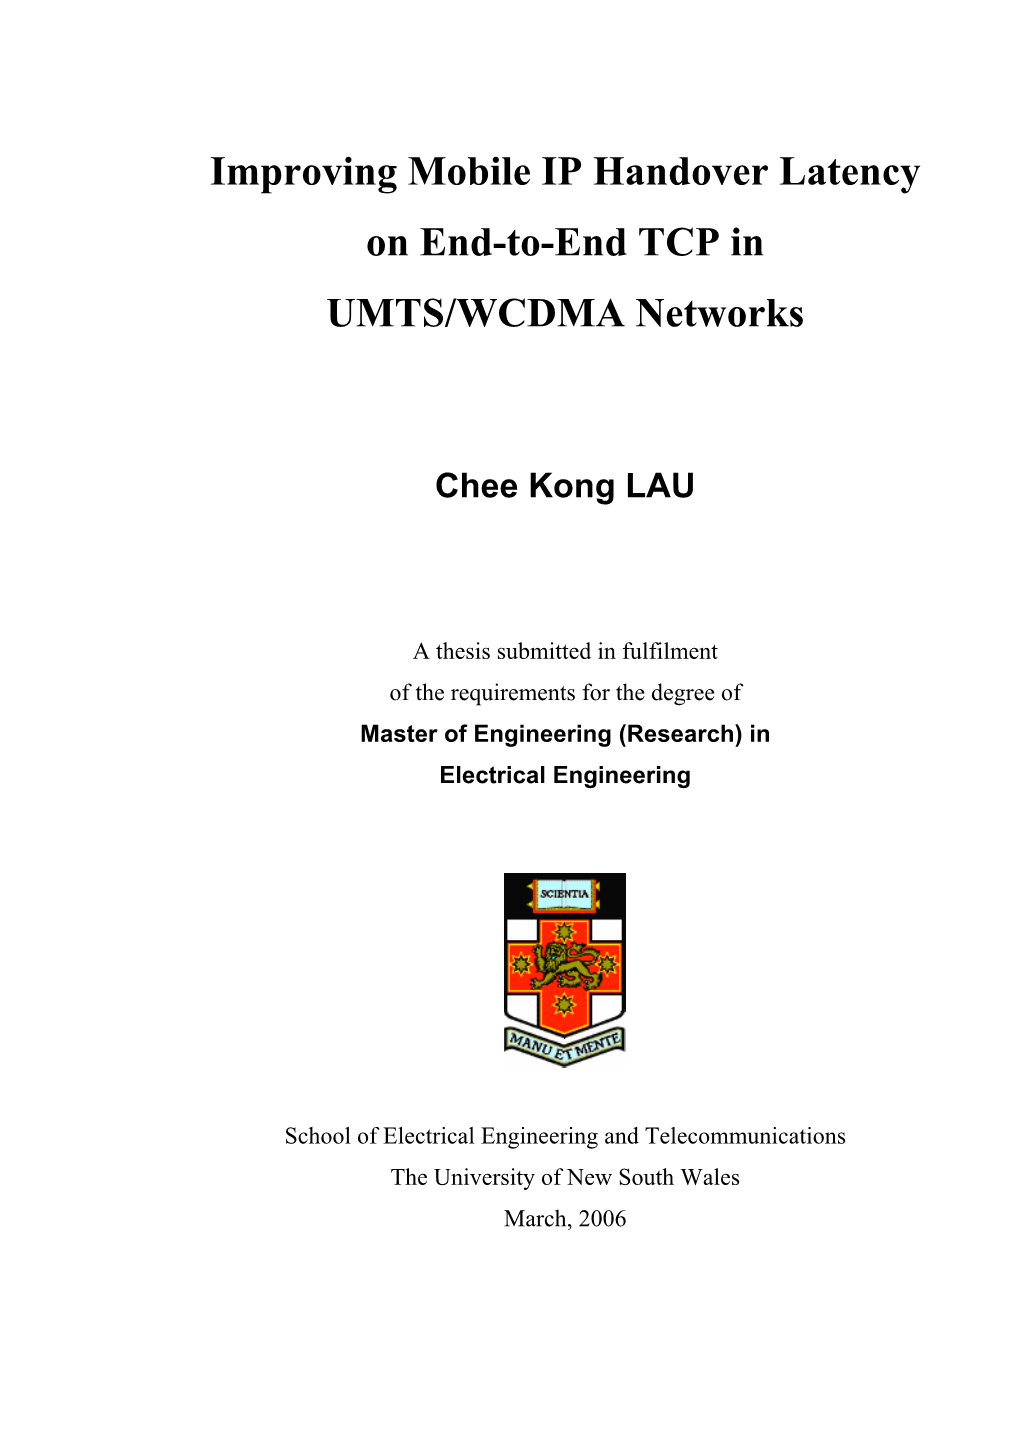 Improving Mobile IP Handover Latency on End-To-End TCP in UMTS/WCDMA Networks